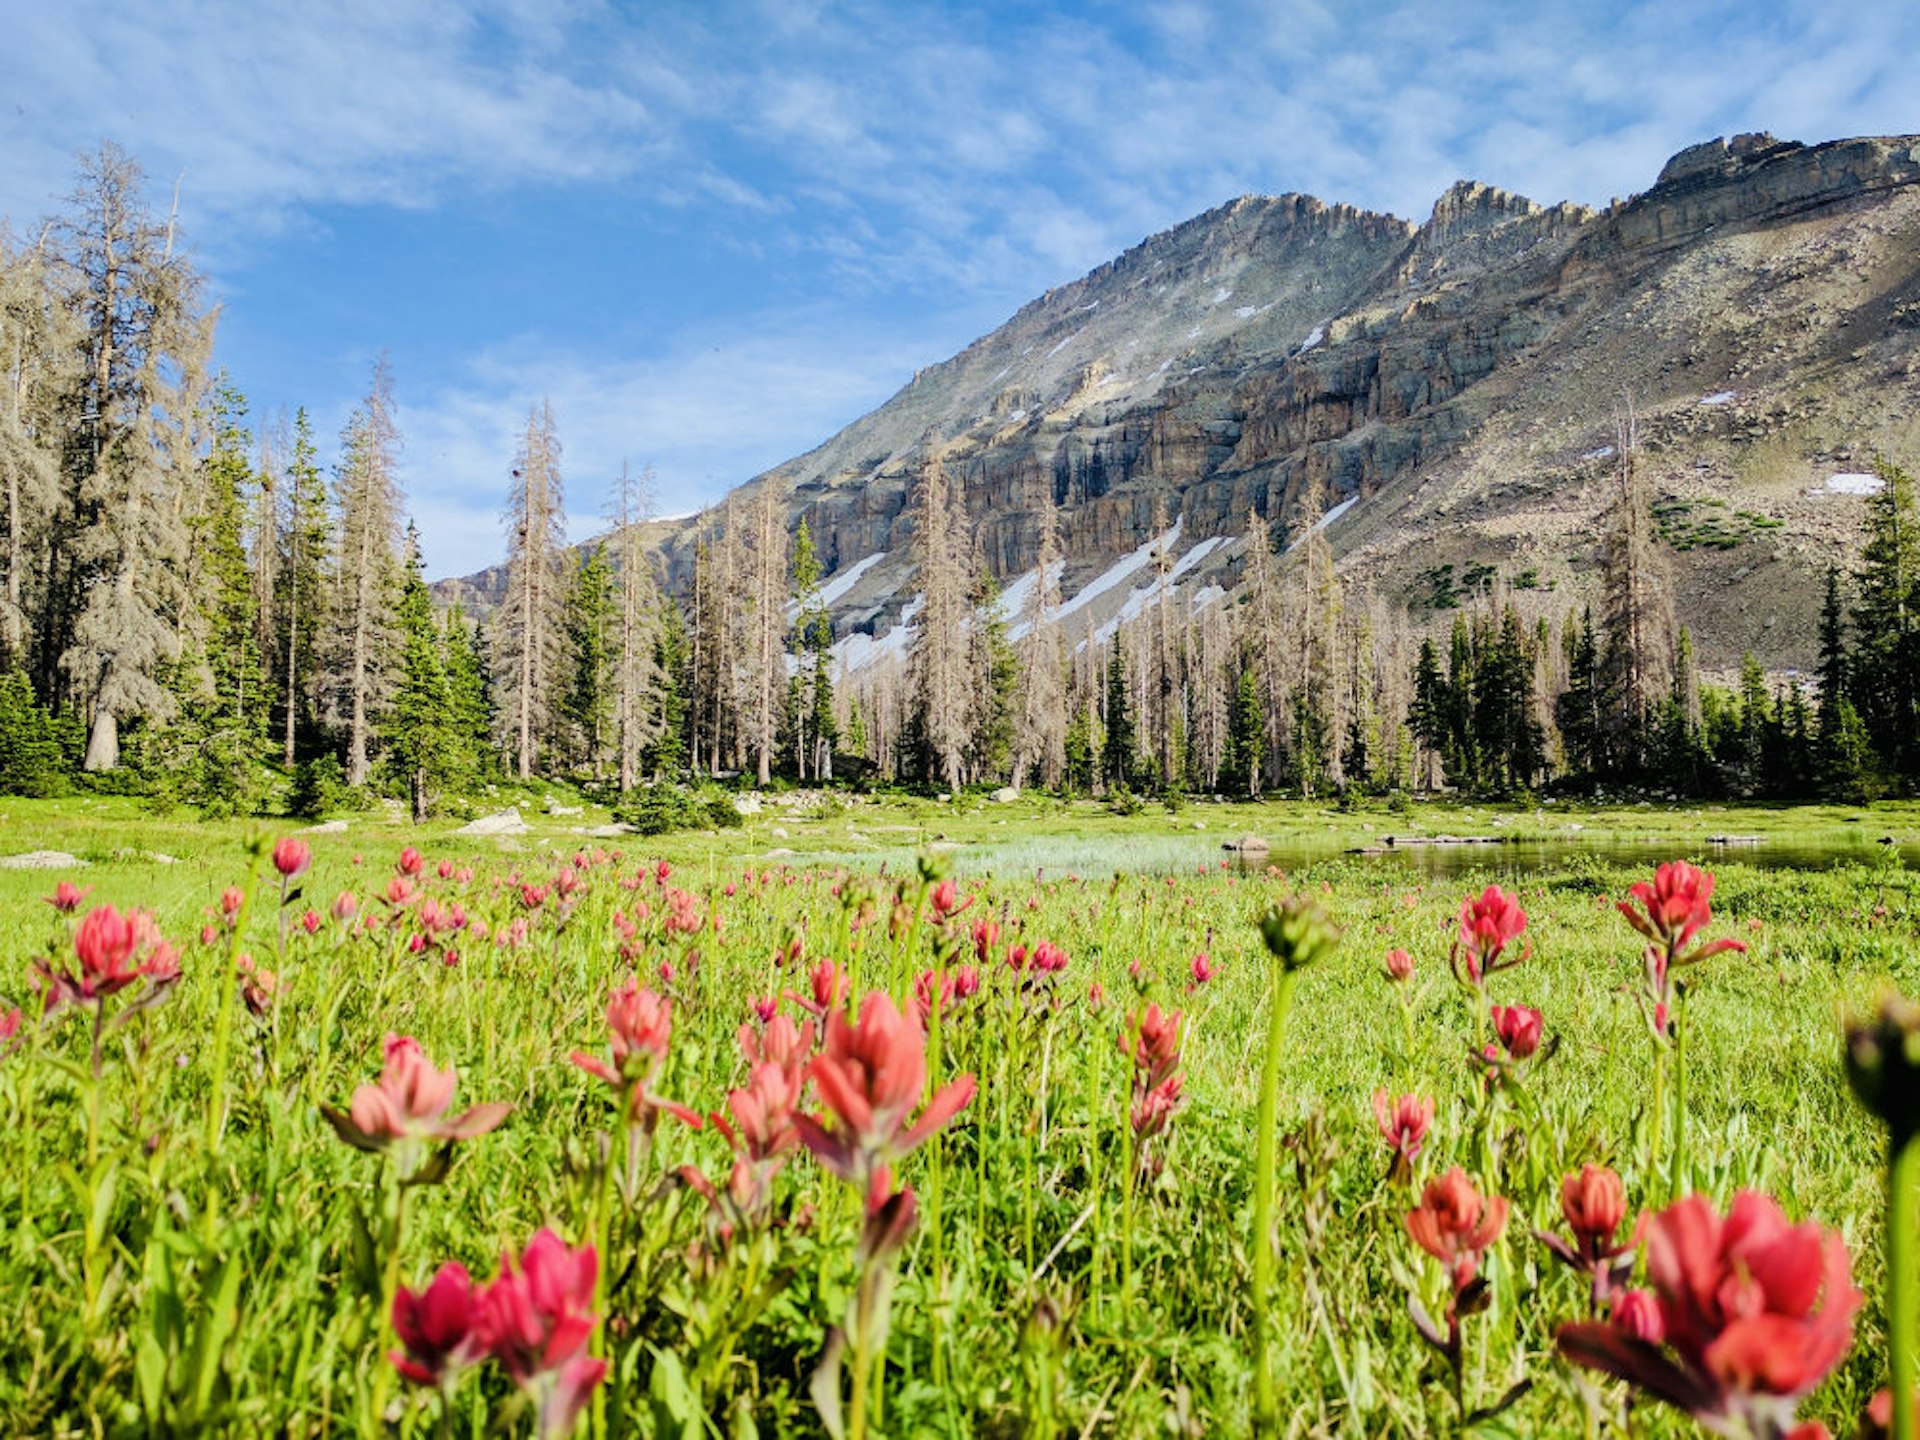 Red wildflowers in a green field, with a mountain and tall trees in the background